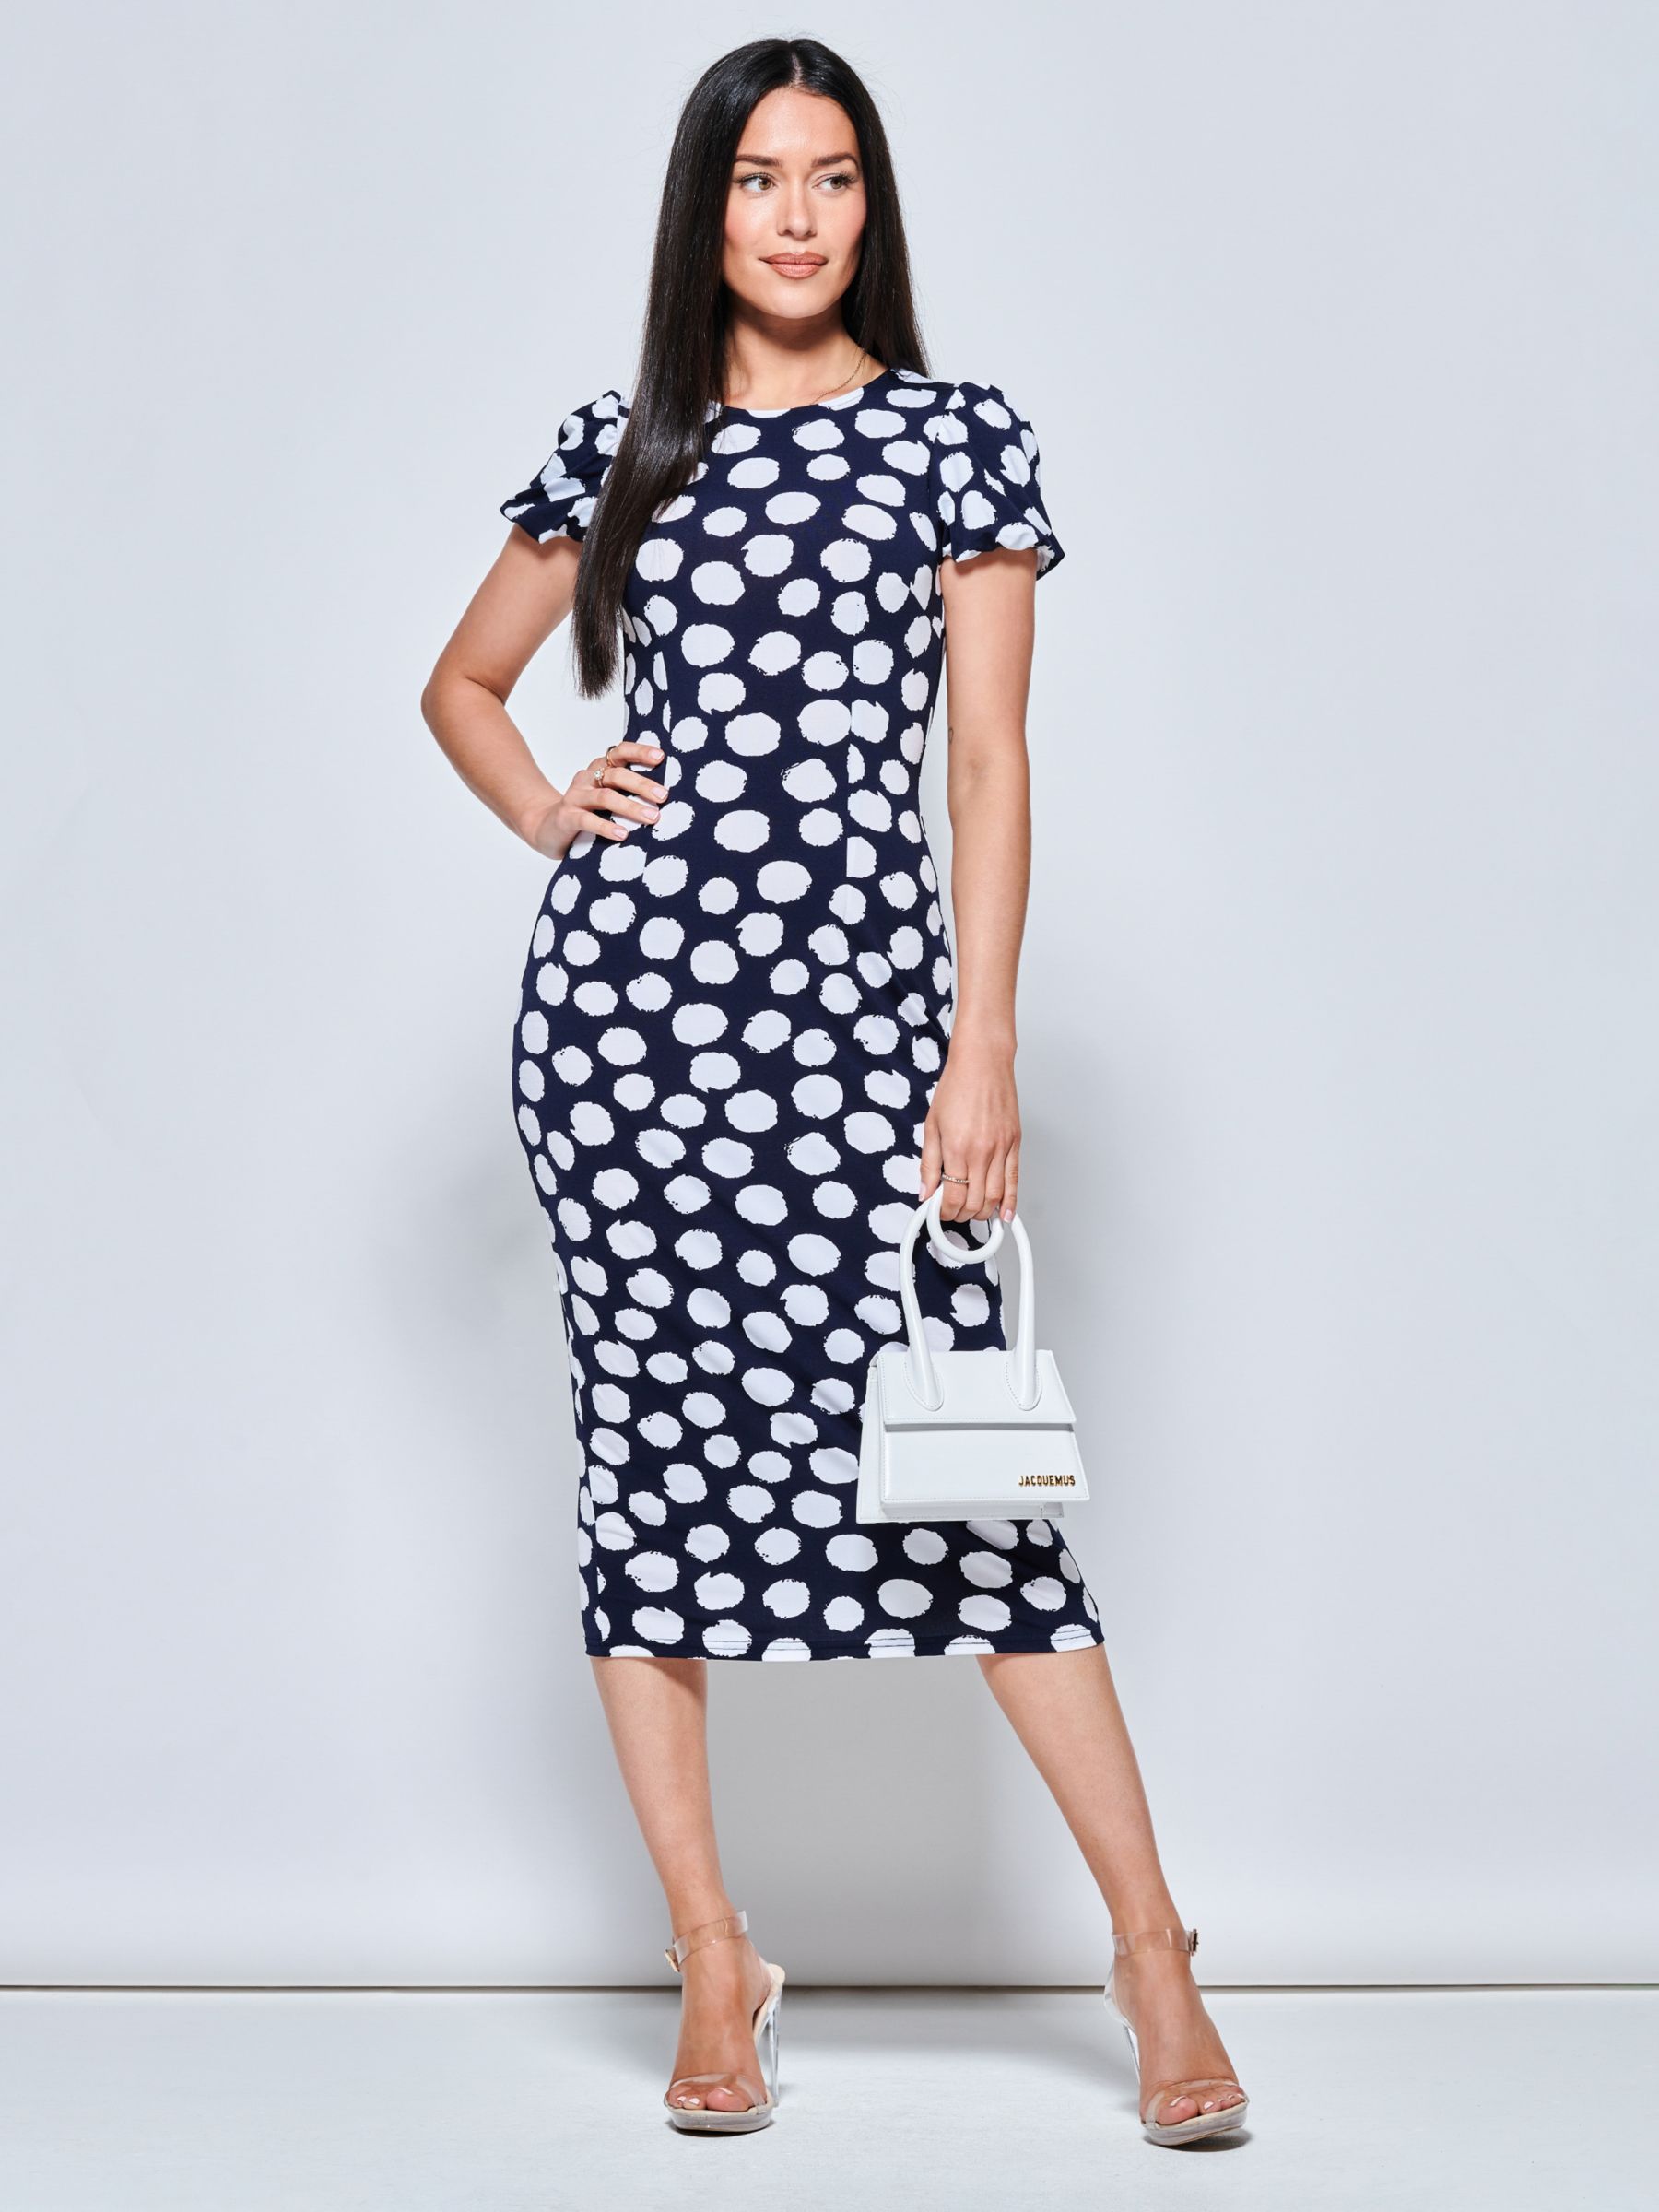 Jolie Moi Floral Ruched Mesh Midi Dress, Navy